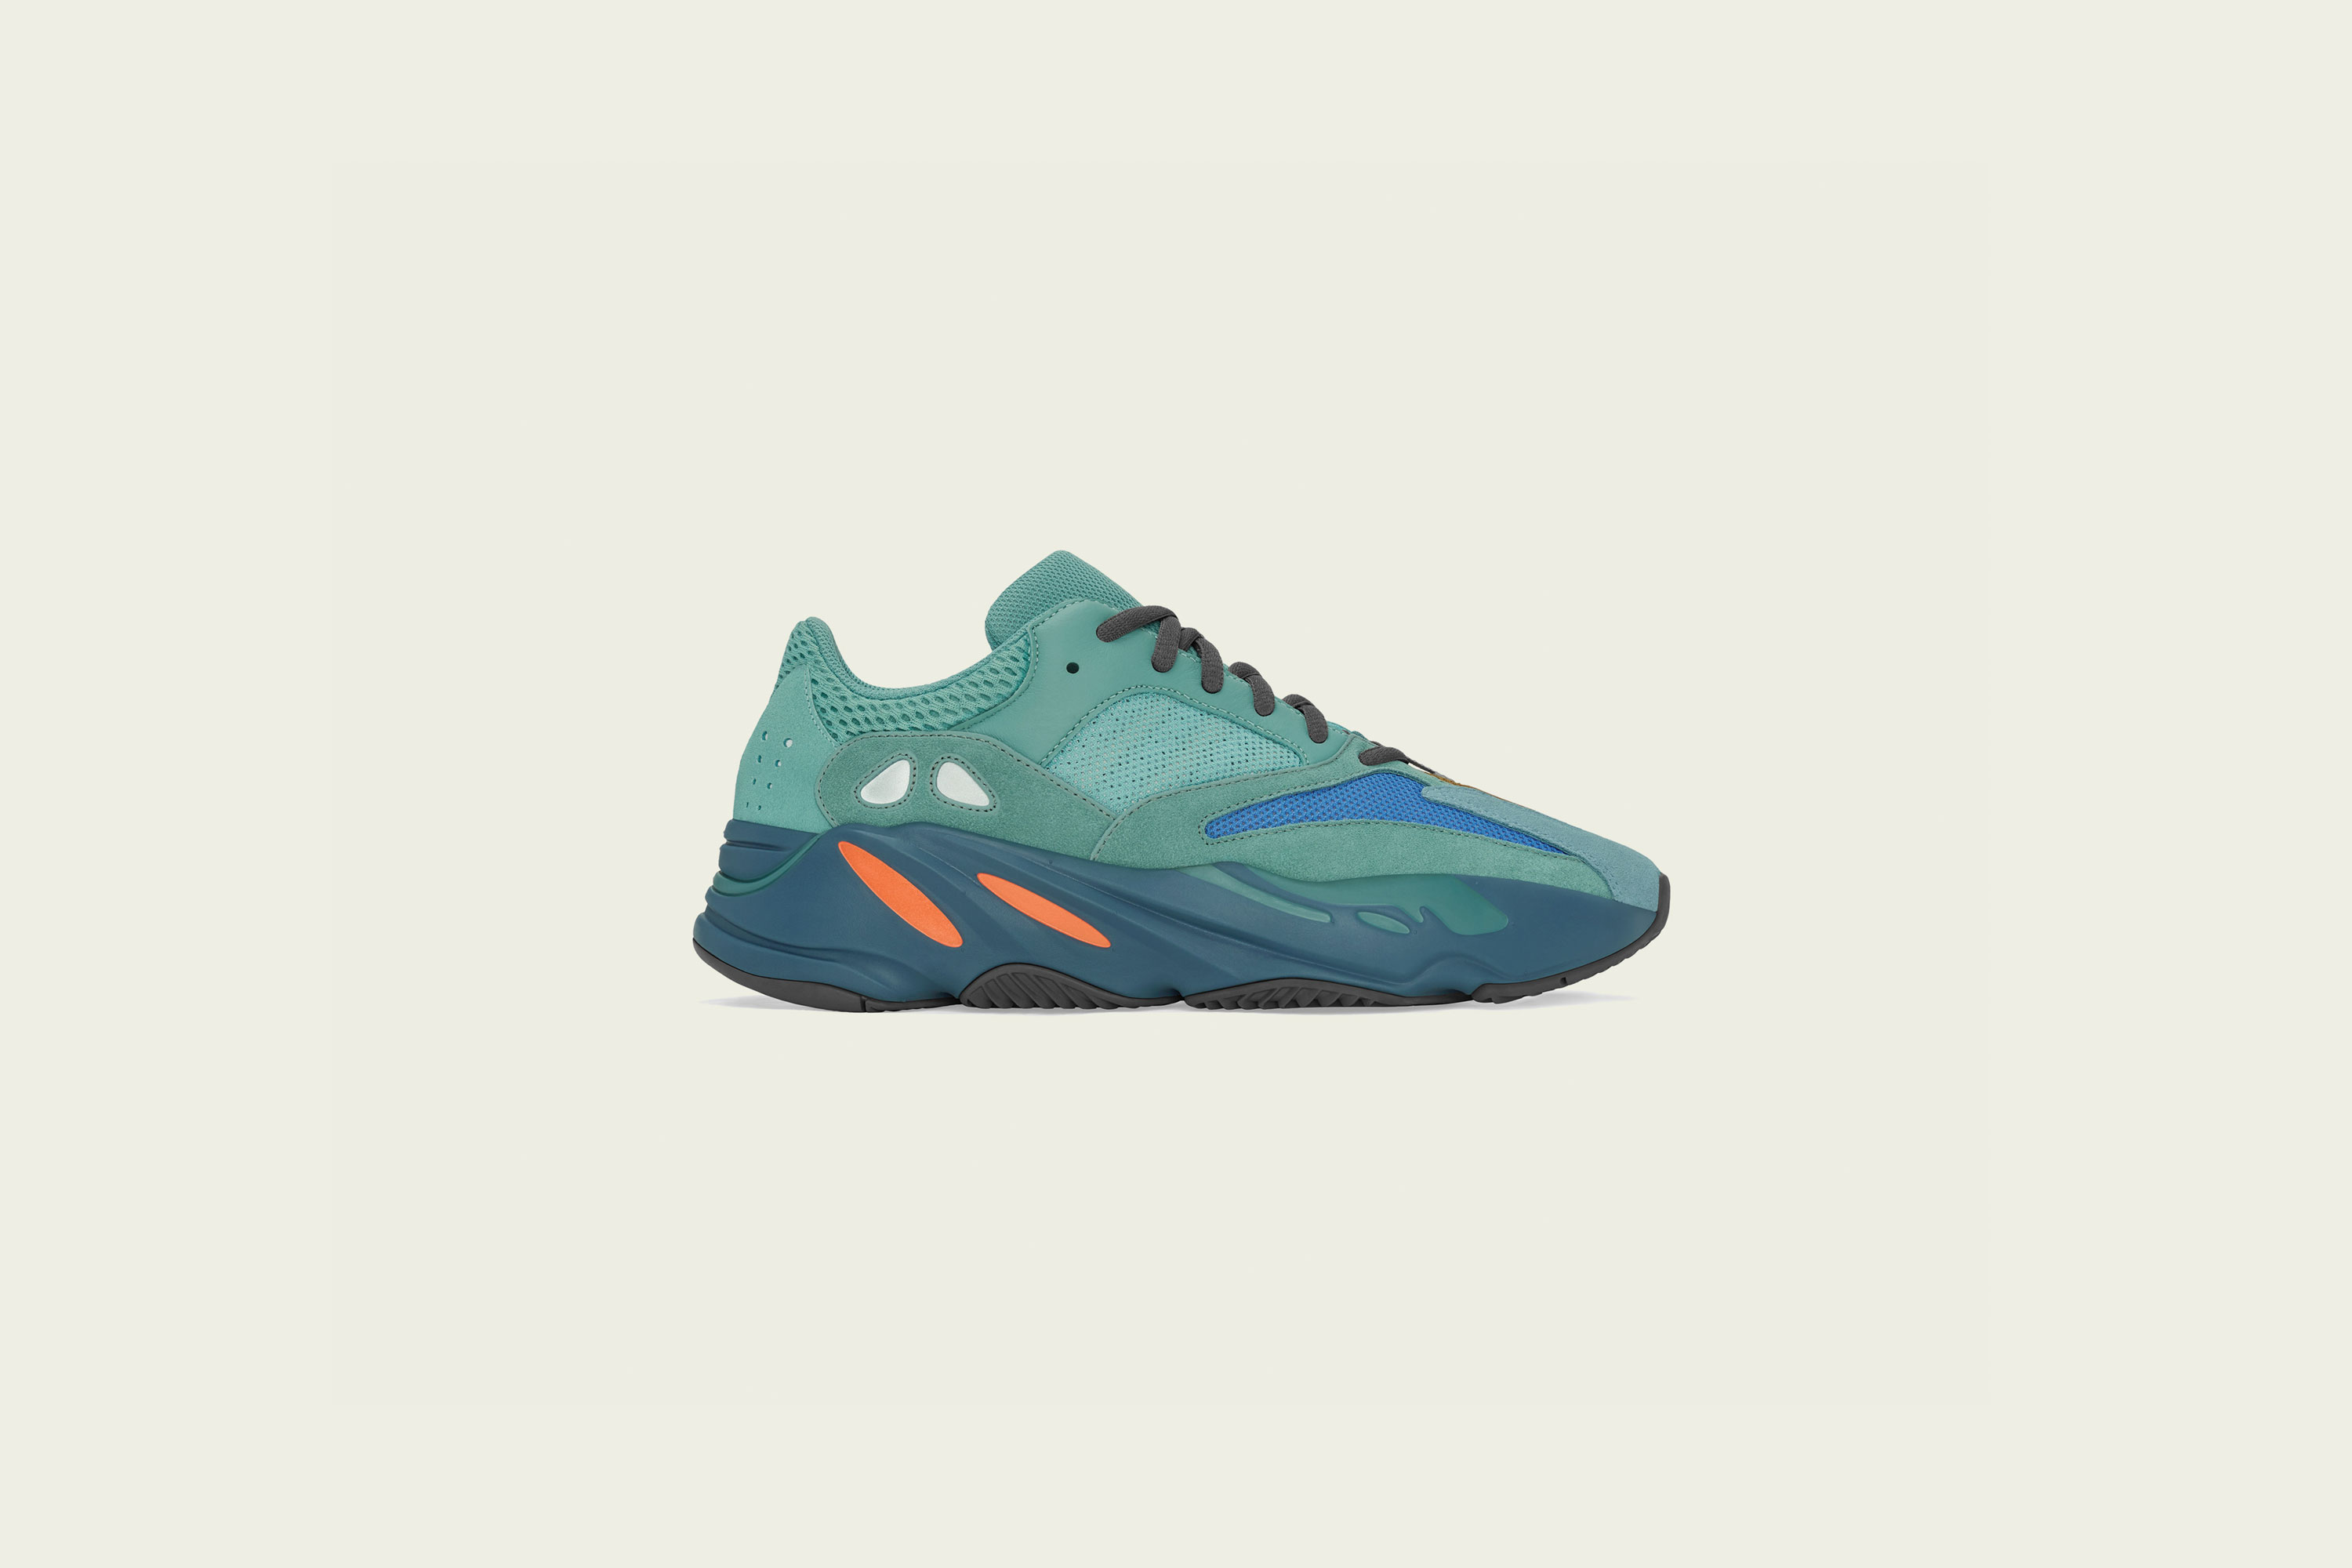 adidas - Yeezy Boost 700 - Fade Azure - Up There